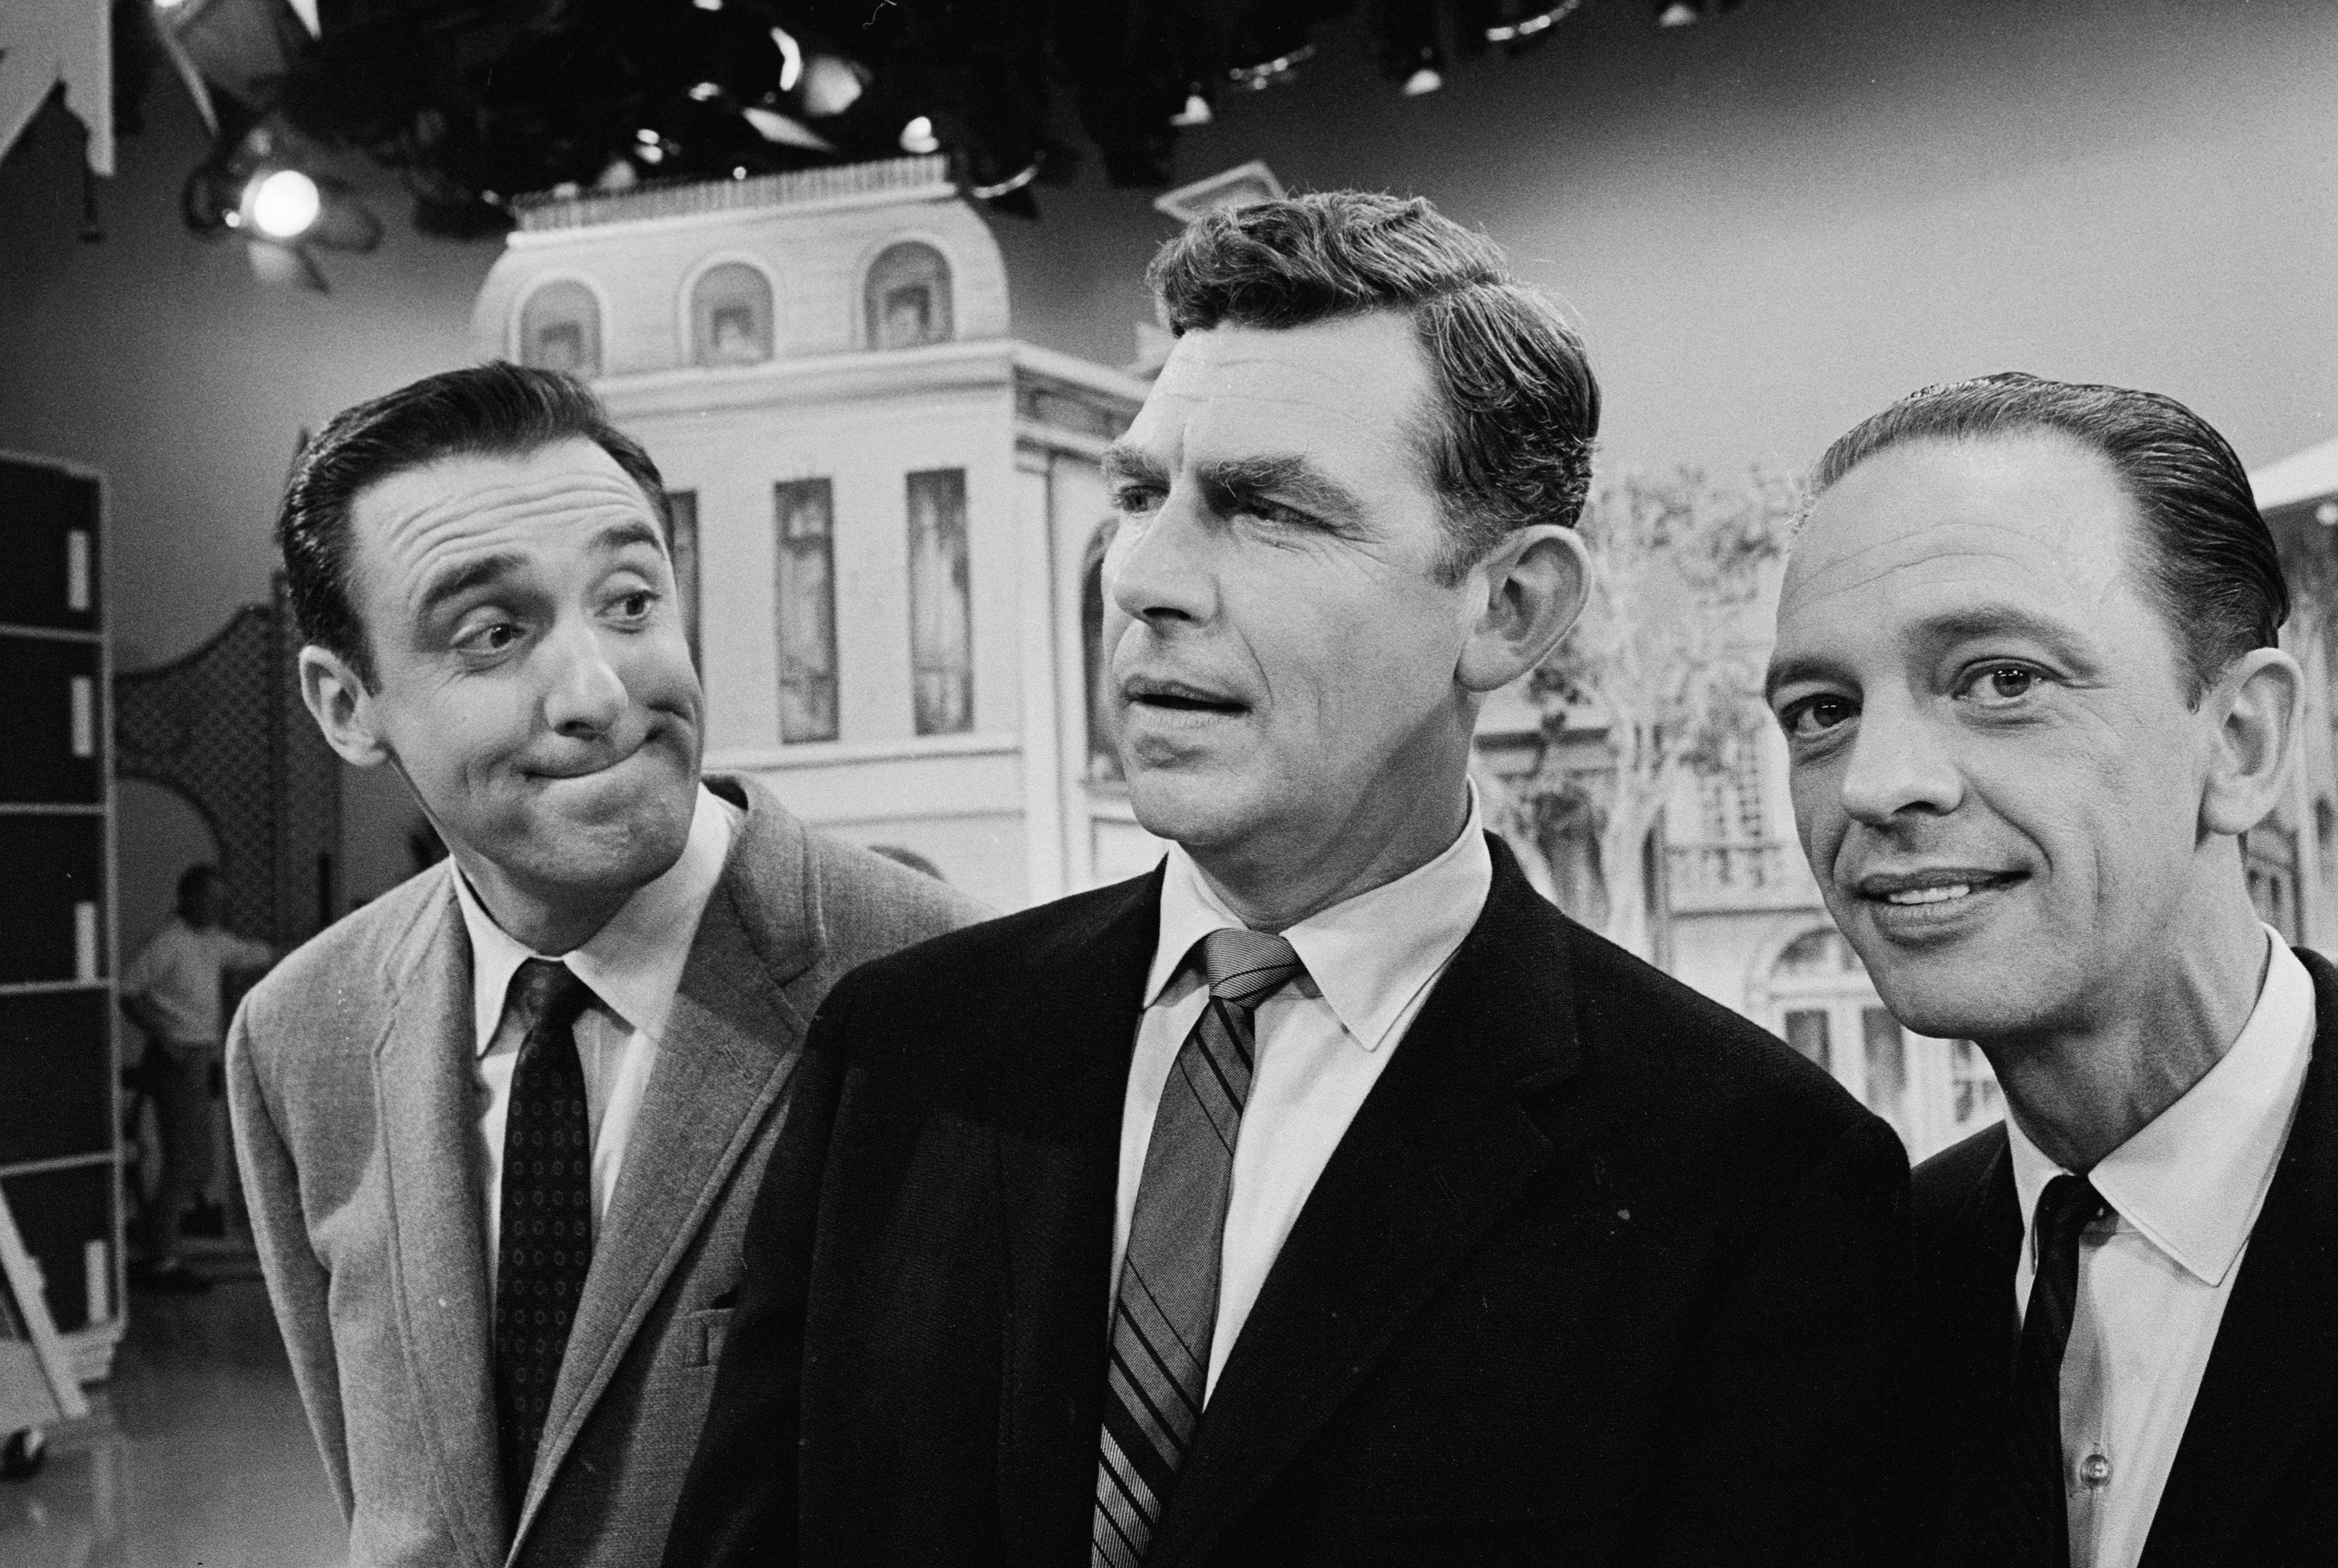 (L - R): Jim Nabors, Andy Griffith, and Don Knotts in 1965